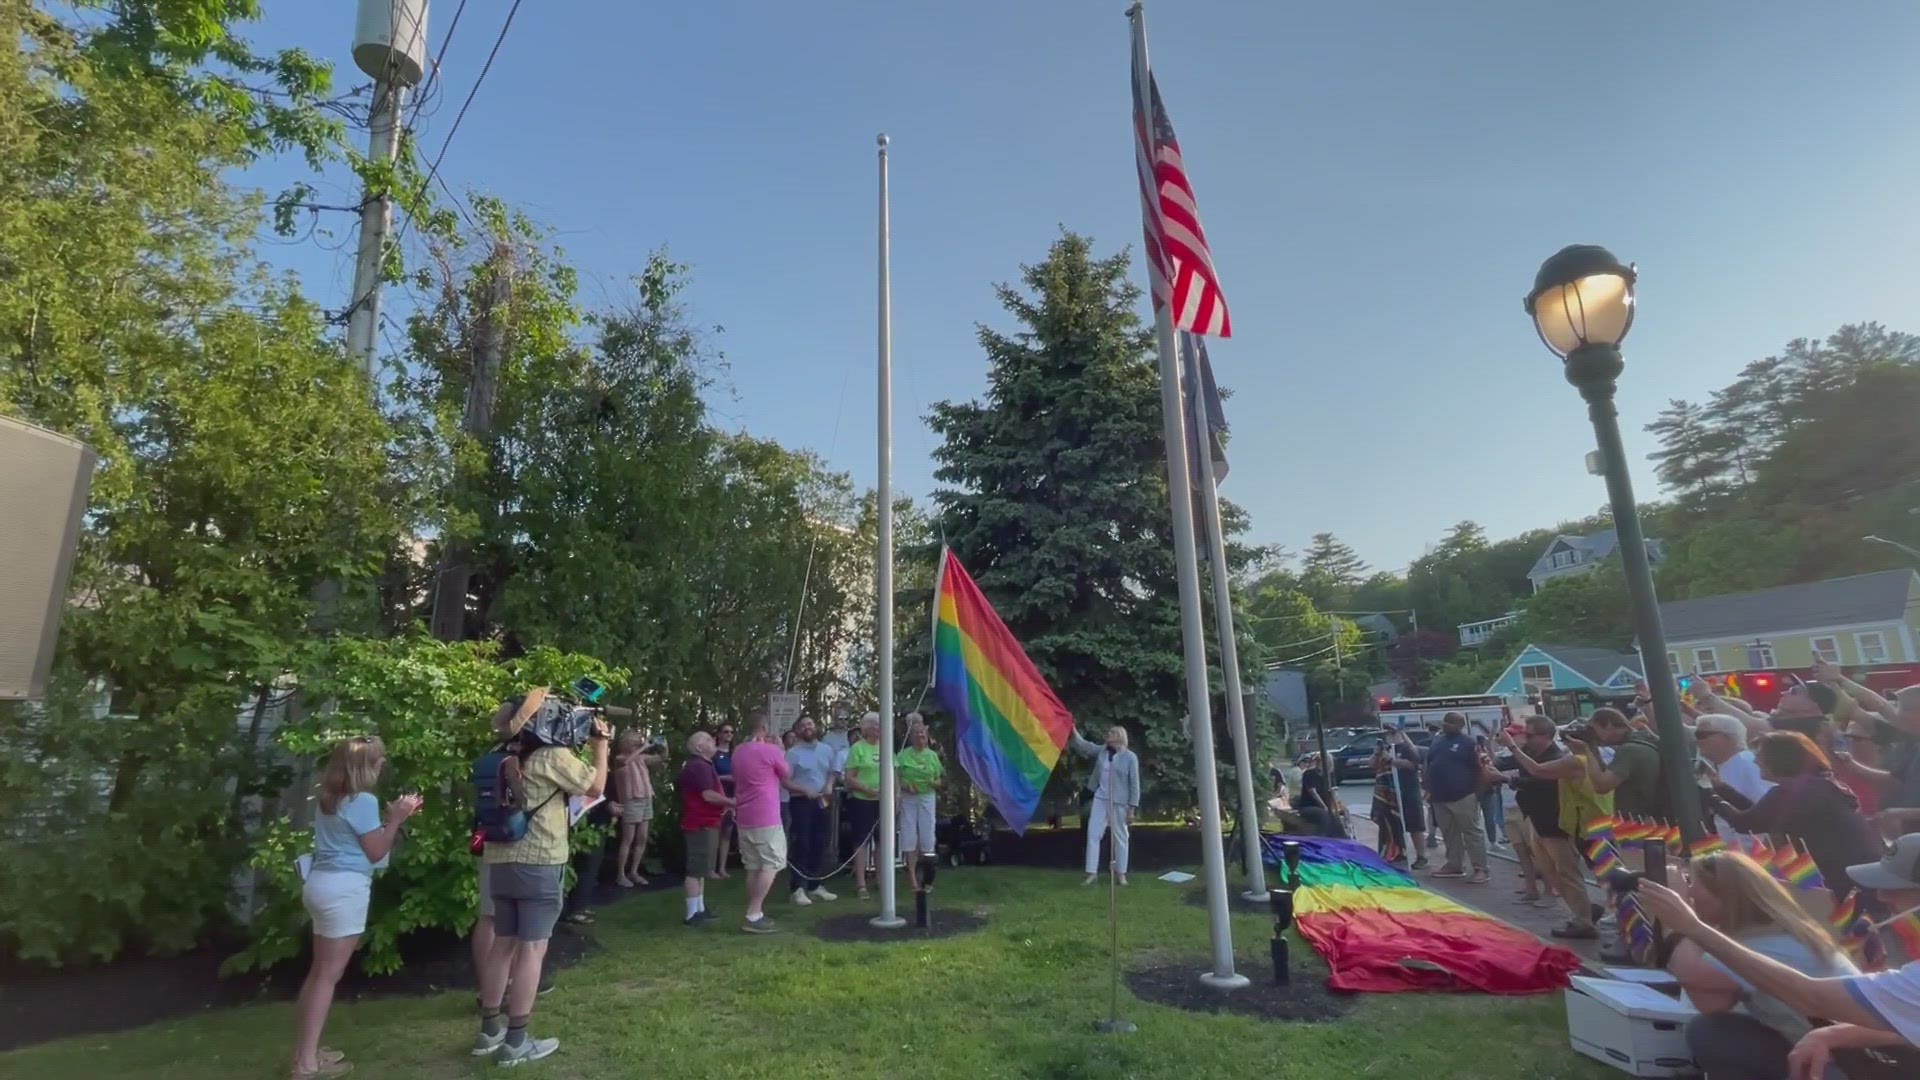 On the first day of Pride Month, Gov. Mills helped raise a rainbow pride flag at Ogunquit's Veterans Park Thursday evening.